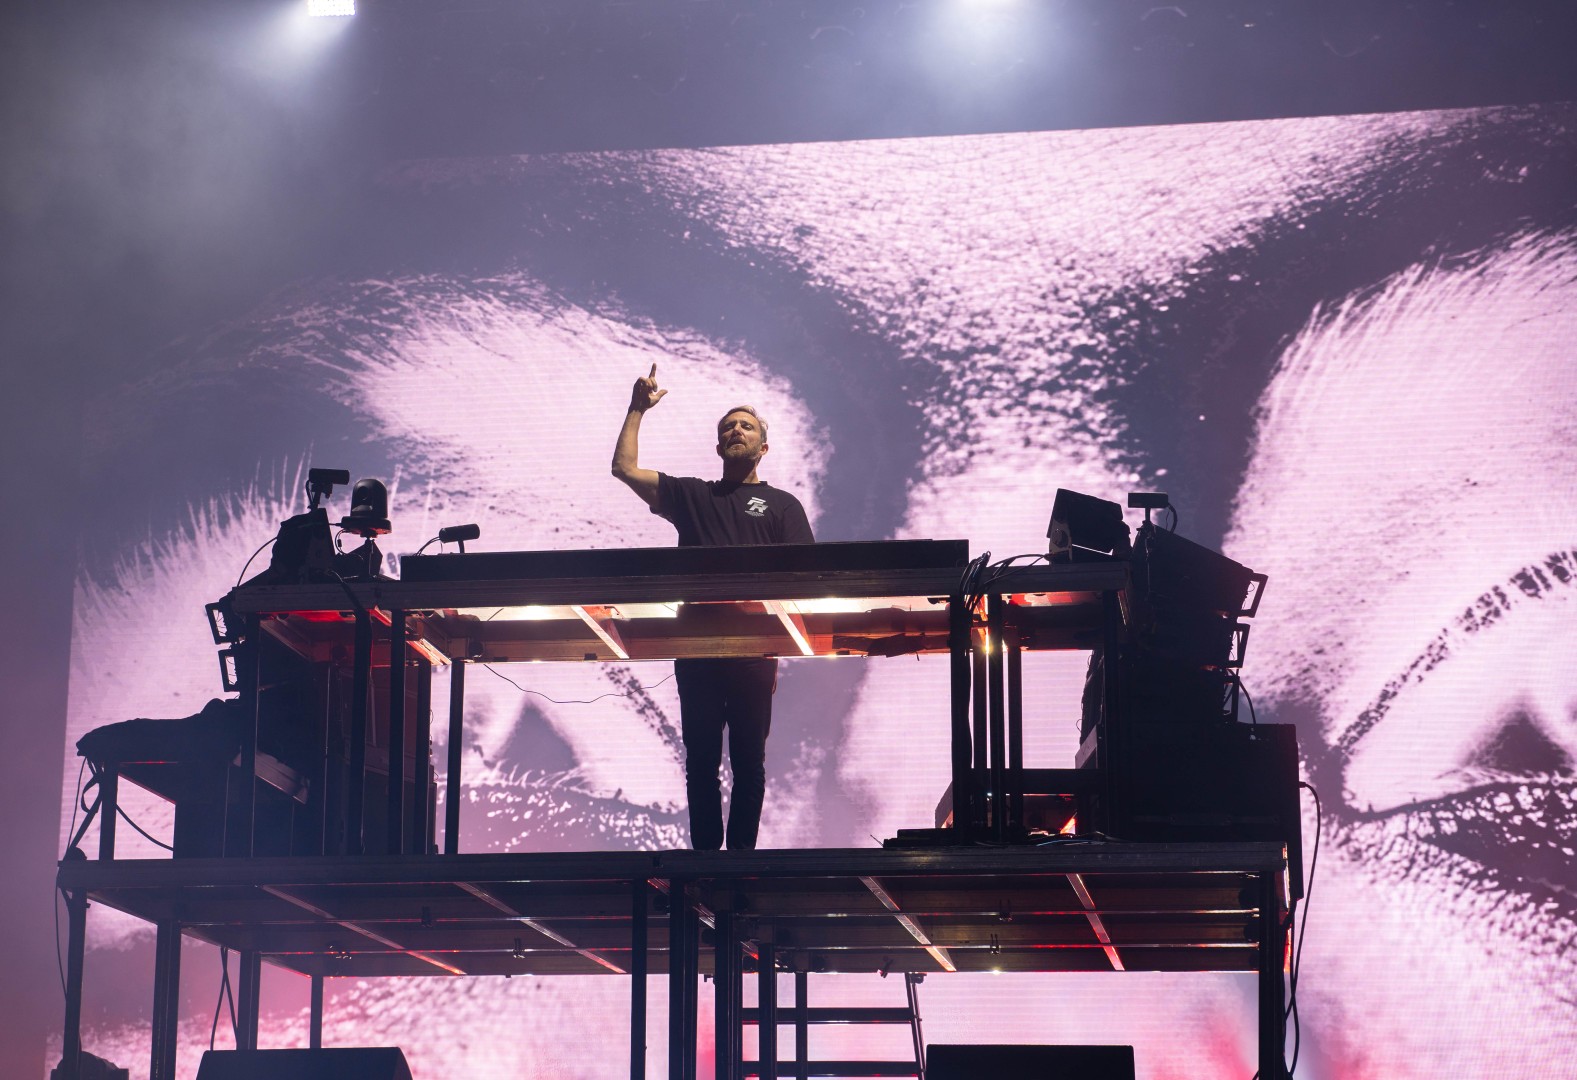 David Guetta at Cluj Arena in Cluj-Napoca on August 7, 2022 (9275b5d88c)